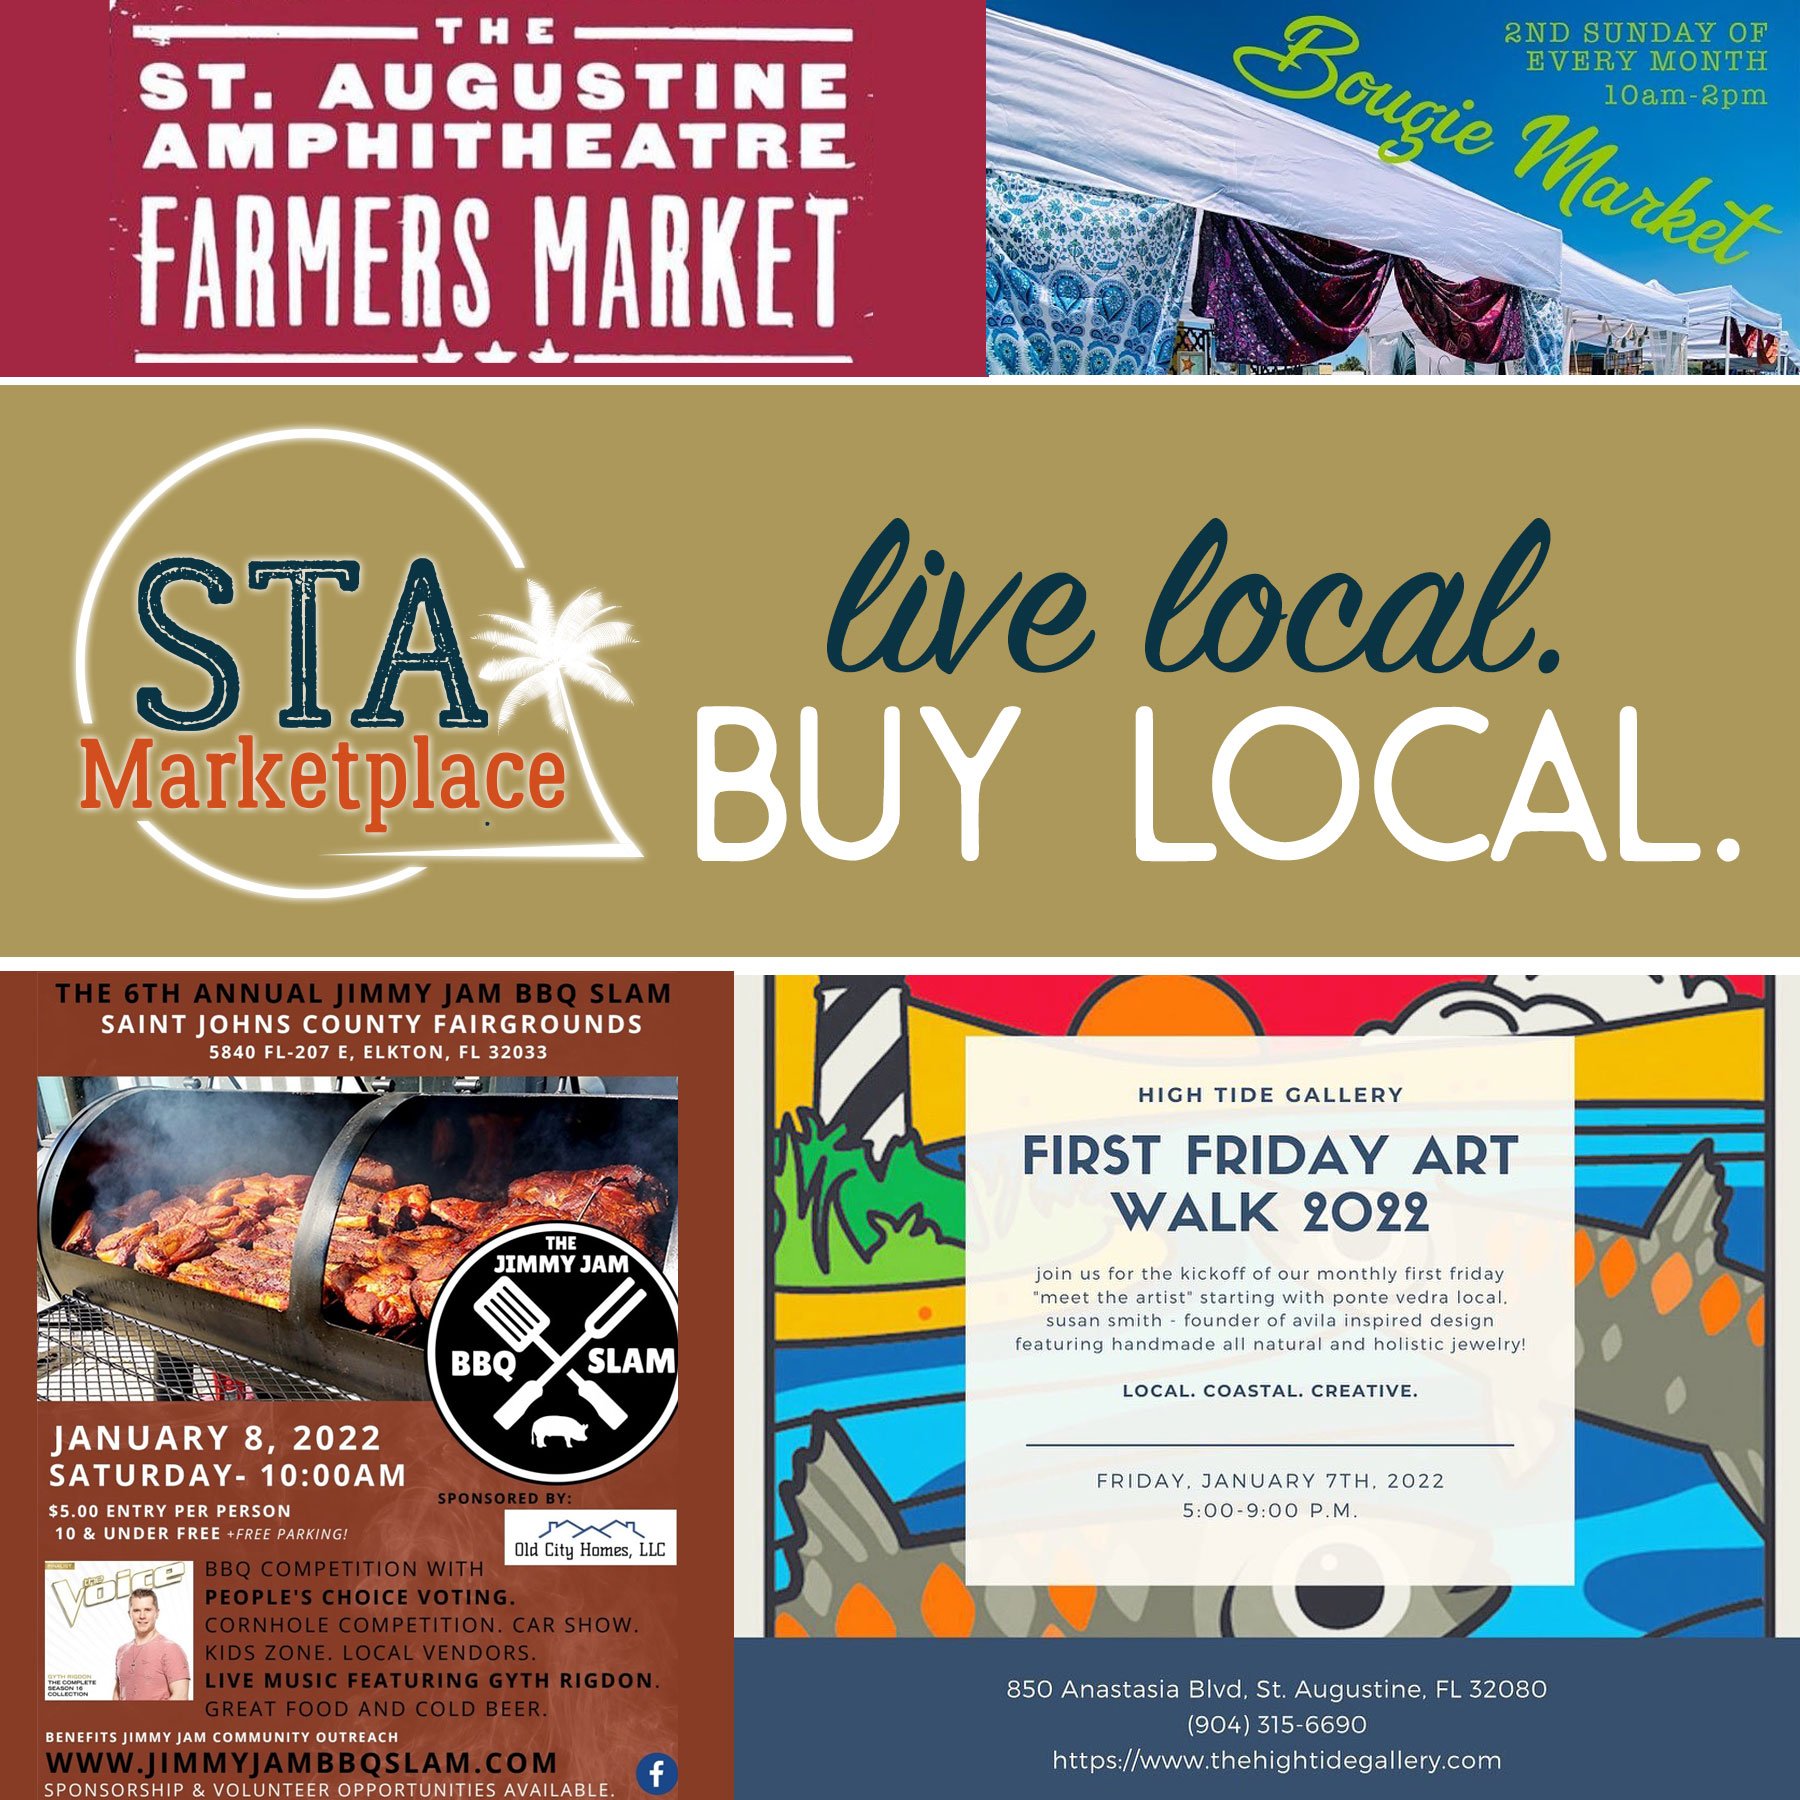 St Augustine Calendar Of Events 2022 Sta Weekend Highlights — Sta Marketplace - Live Local. Buy Local.